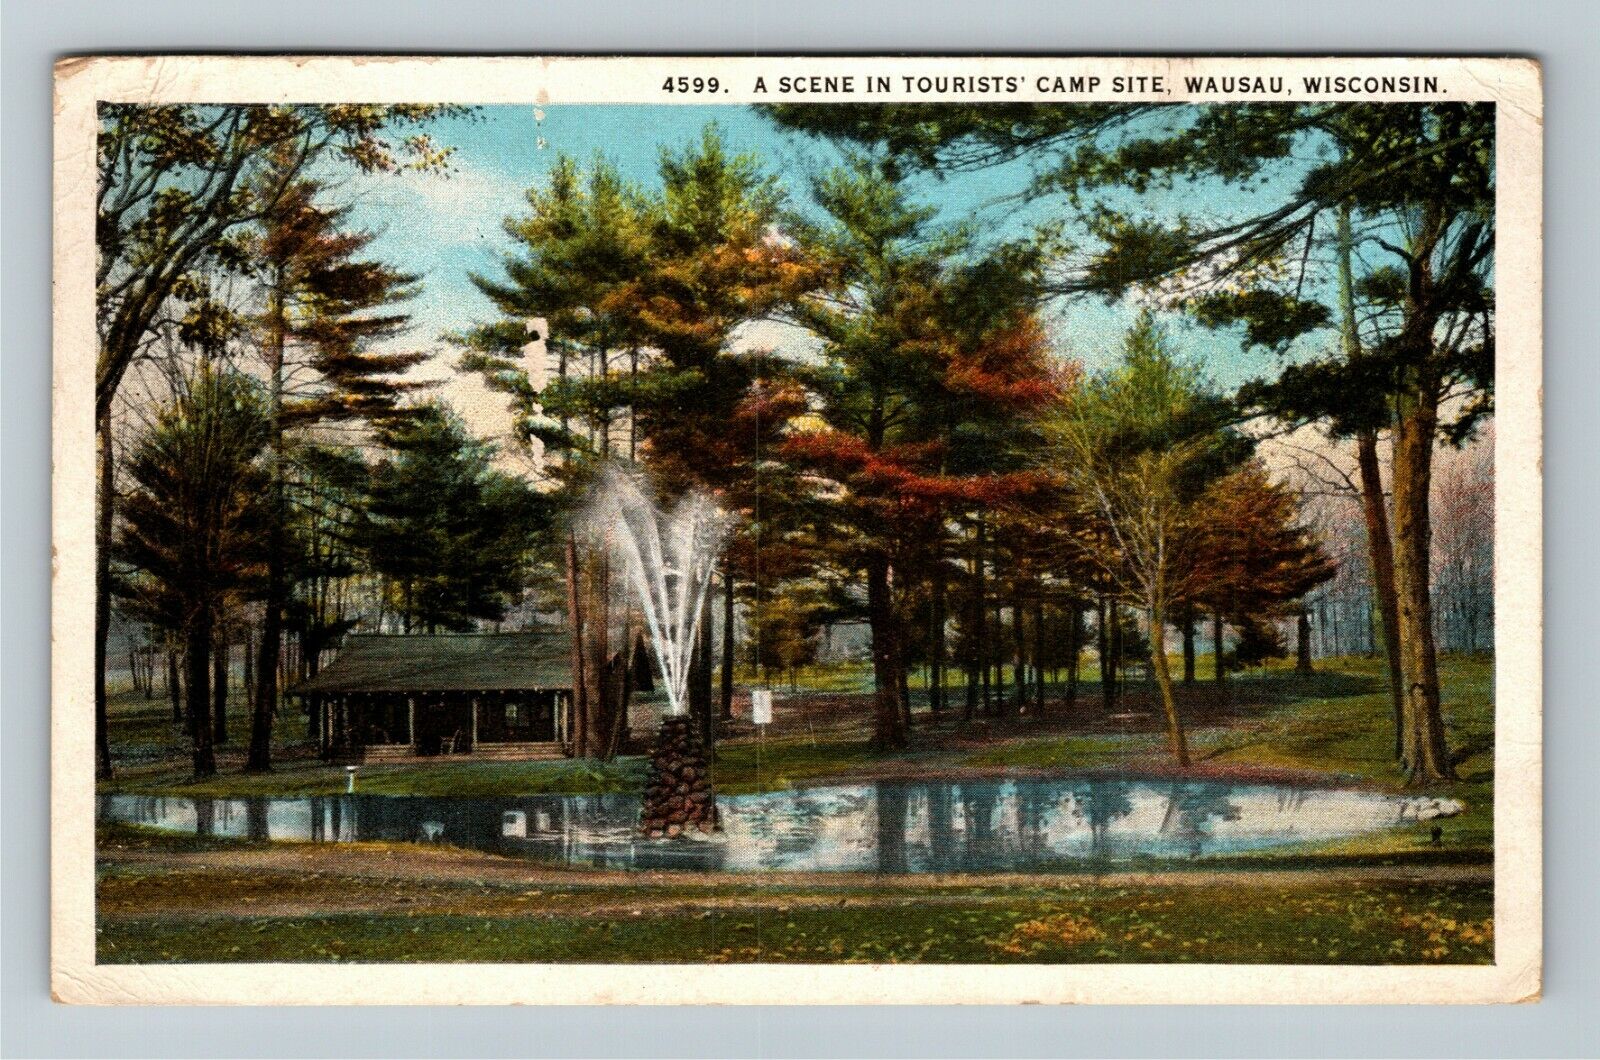 Wausau WI-Wisconsin, Scenic View Tourist Camp Site, c1924 Vintage Postcard